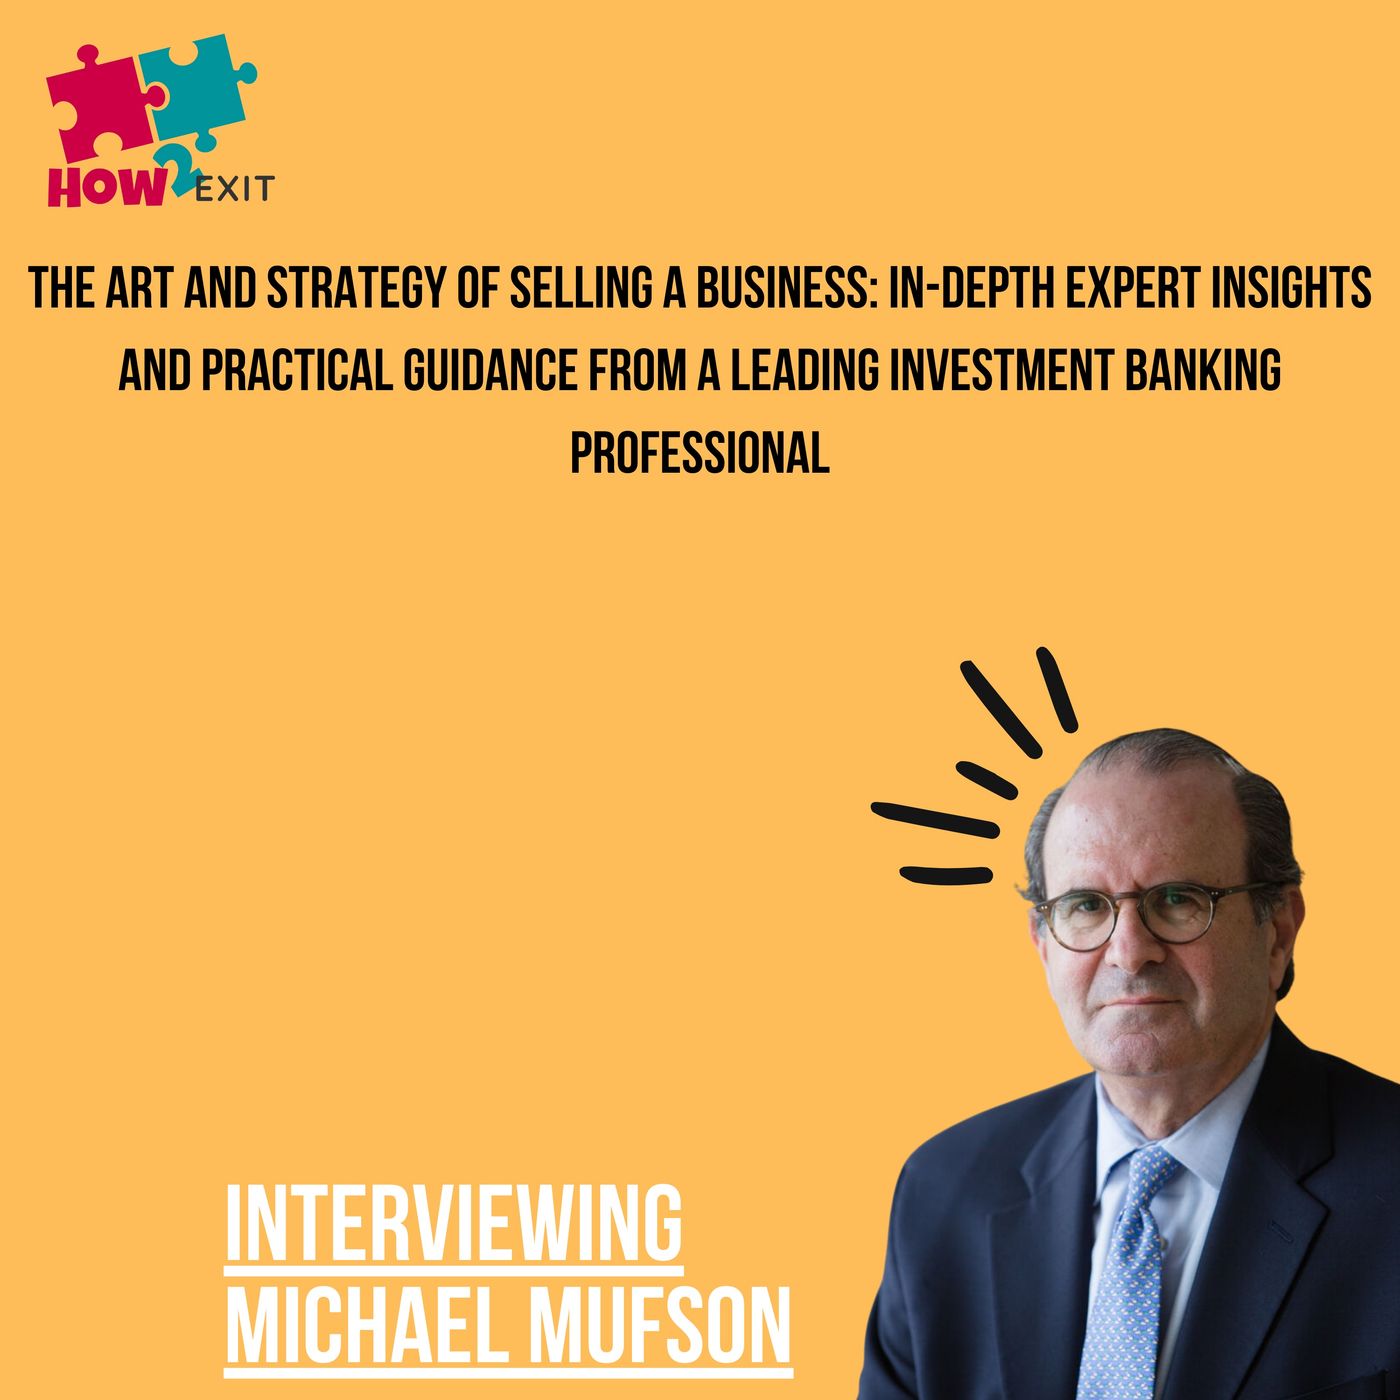 E221: Michael Mufson Discusses Investment Banking and Business Exit Strategies